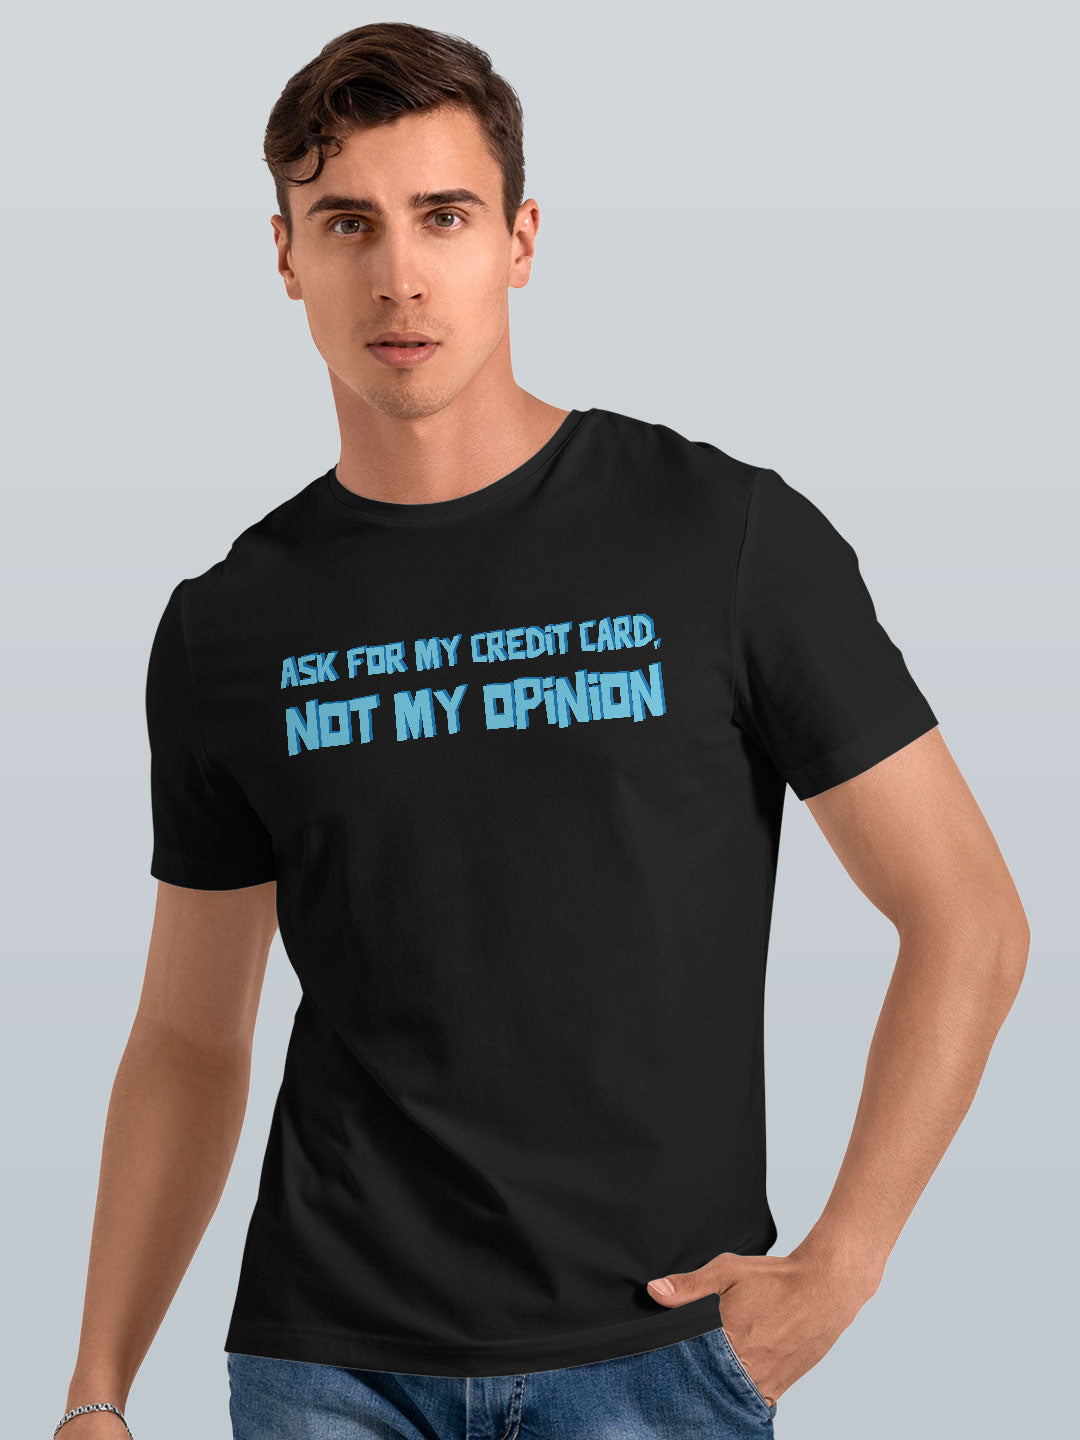 Not My Opinion Tshirt